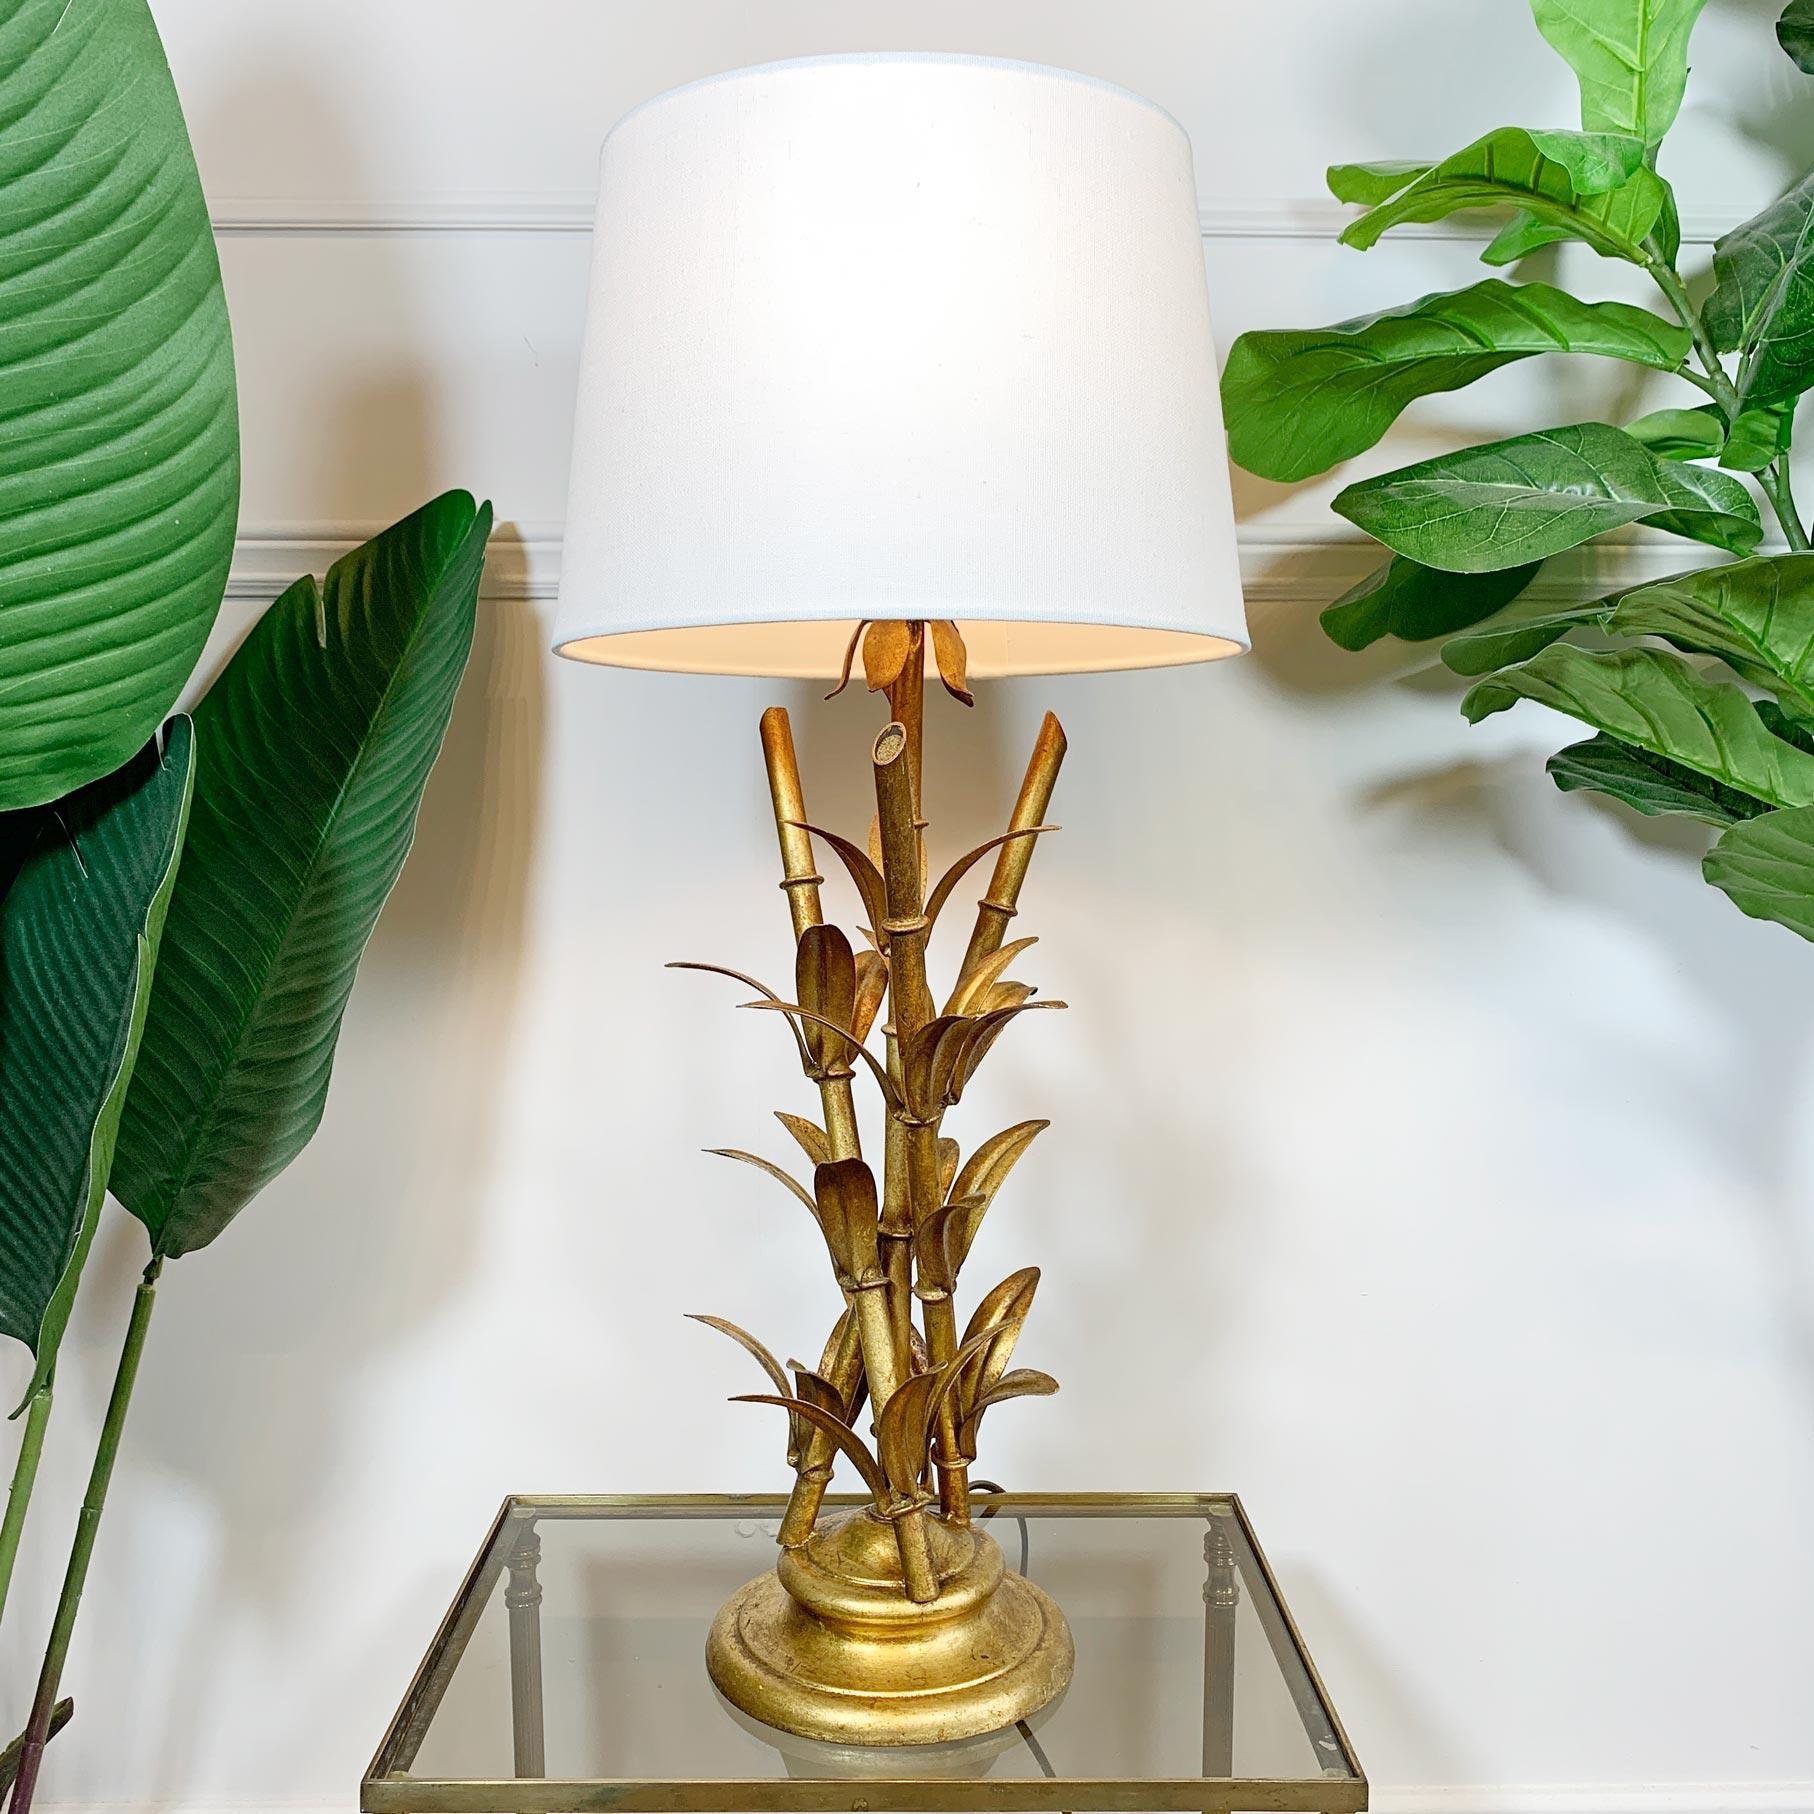 1950’s Italian gilt metal table lamp, in the form of bamboo sticks and leaves. 
The lamp has been fitted with a modern replacement shade.

Measures: Height including shade 66cm x Width 30cm

Height Excluding Shade 50cm x Width 19cm.

Base